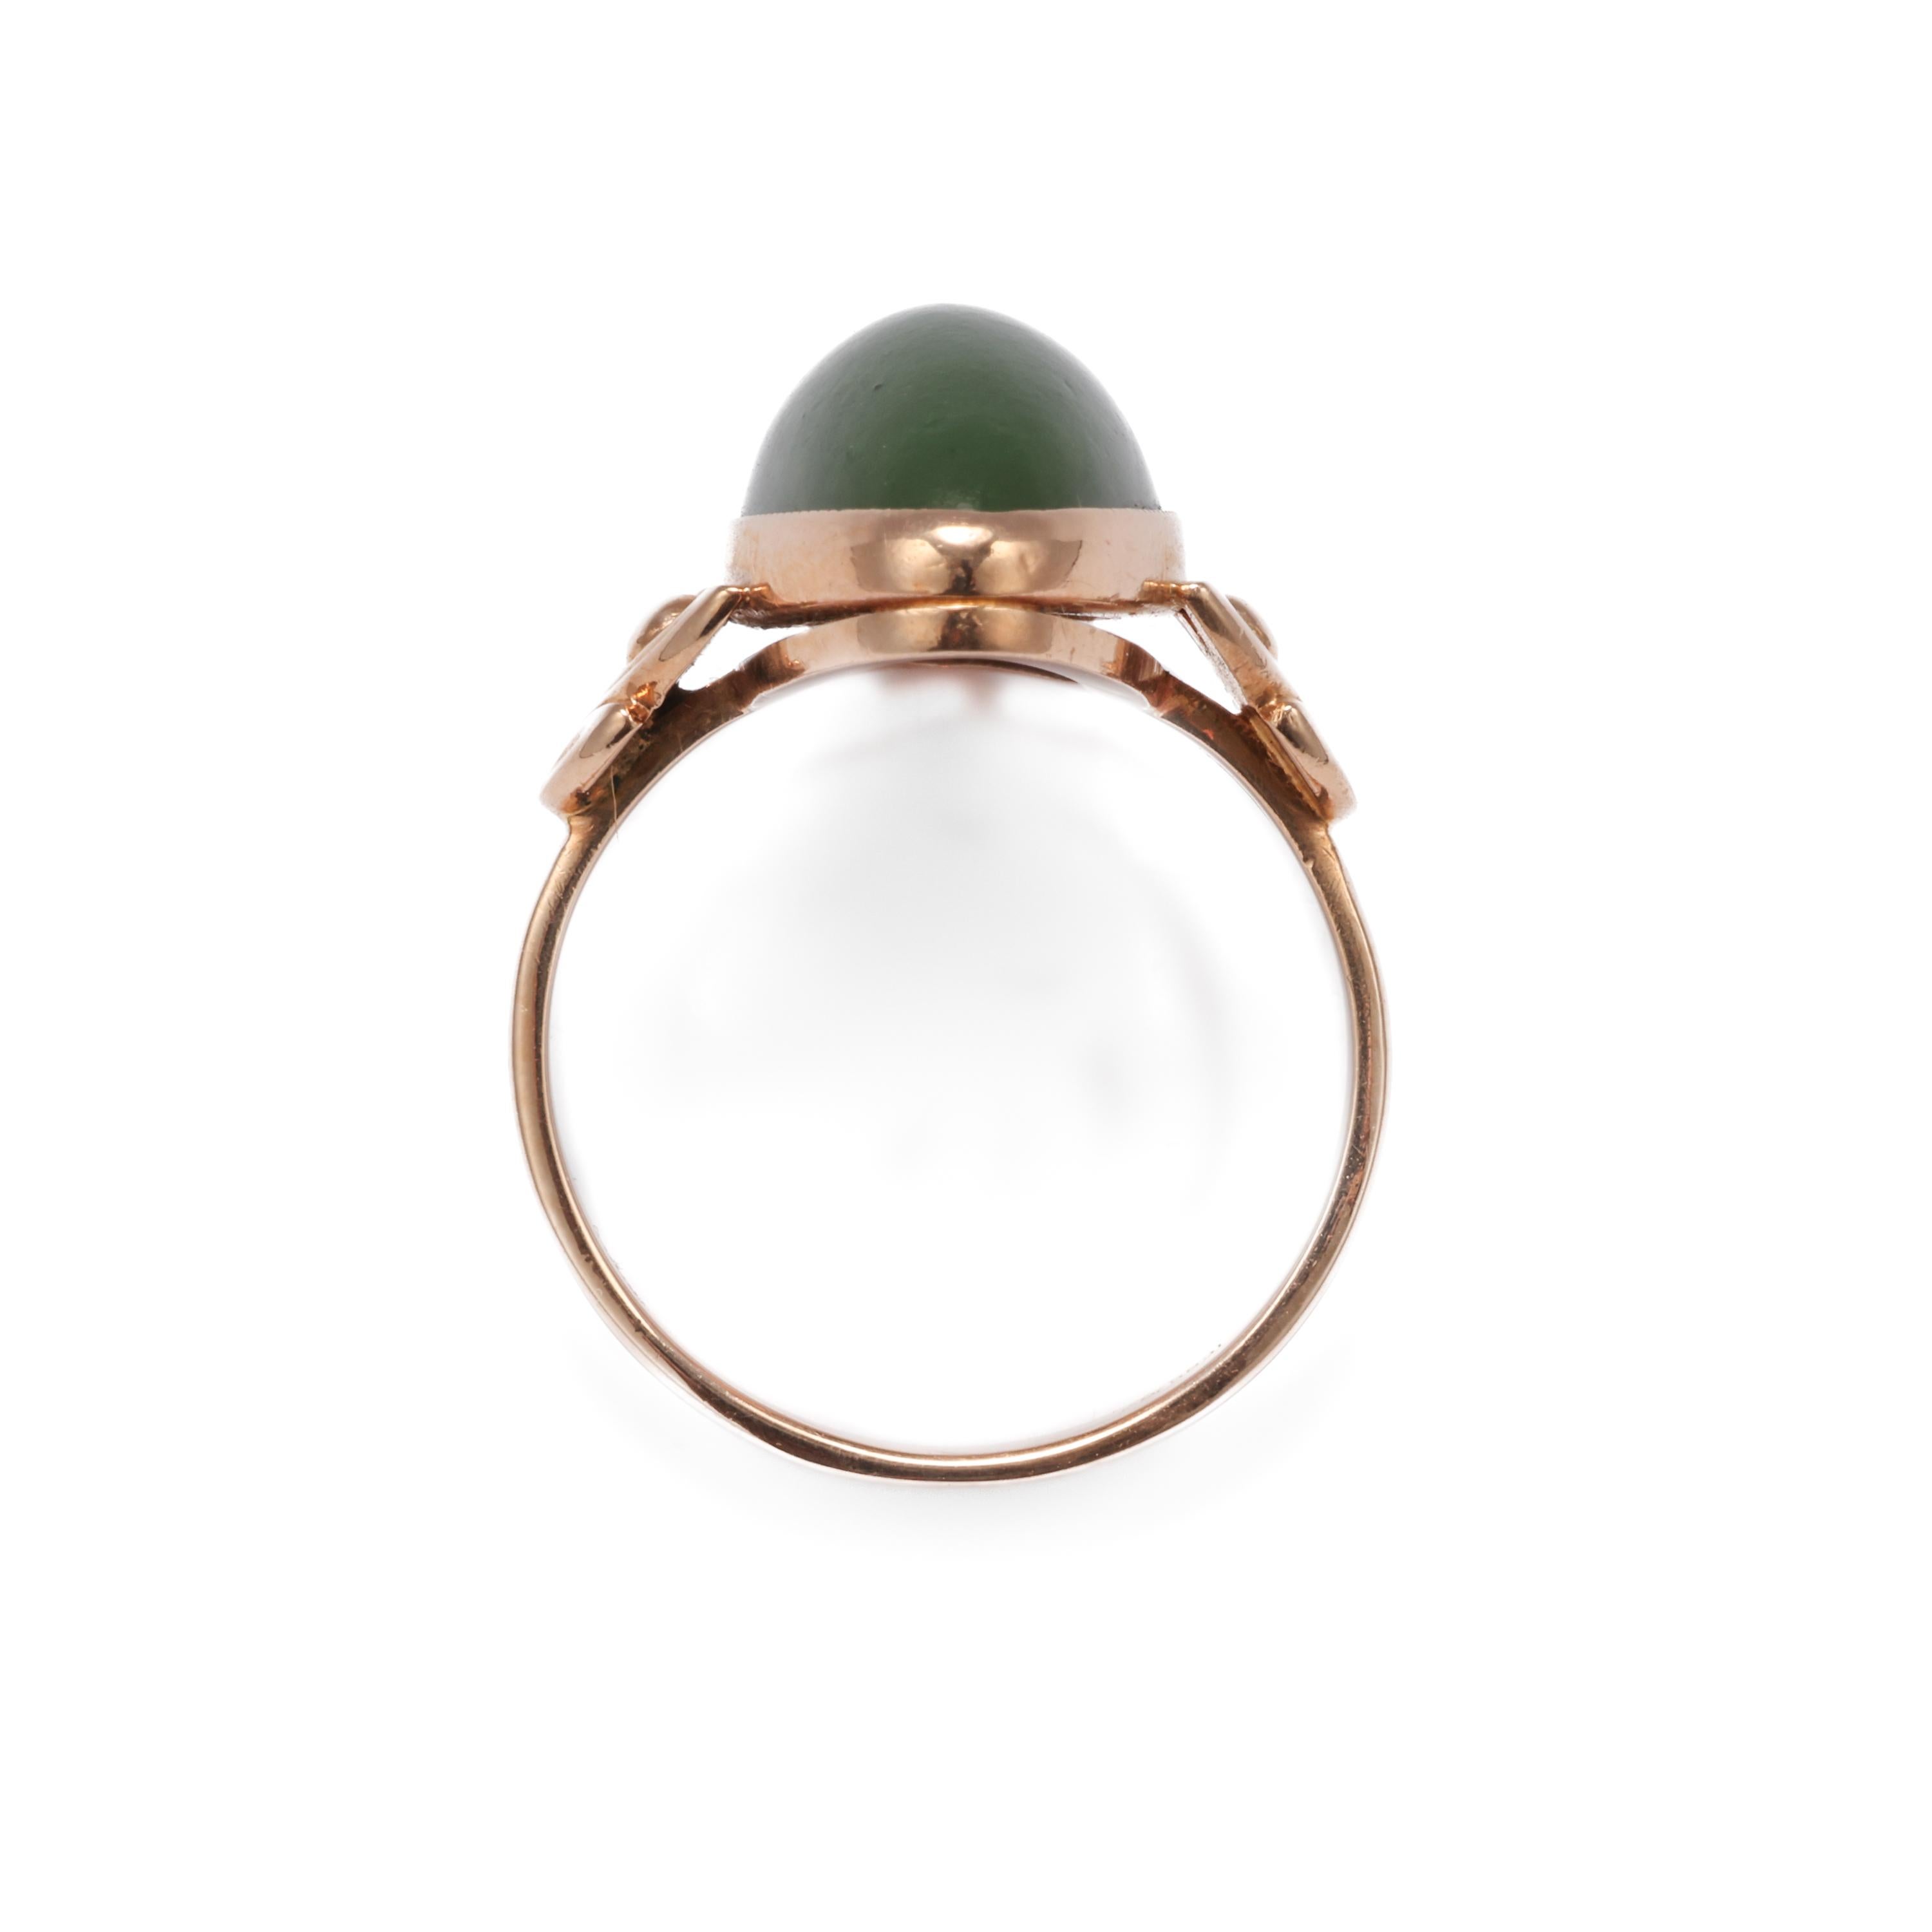 Nephrite Ring in Rose Gold Art Nouveau Style 1